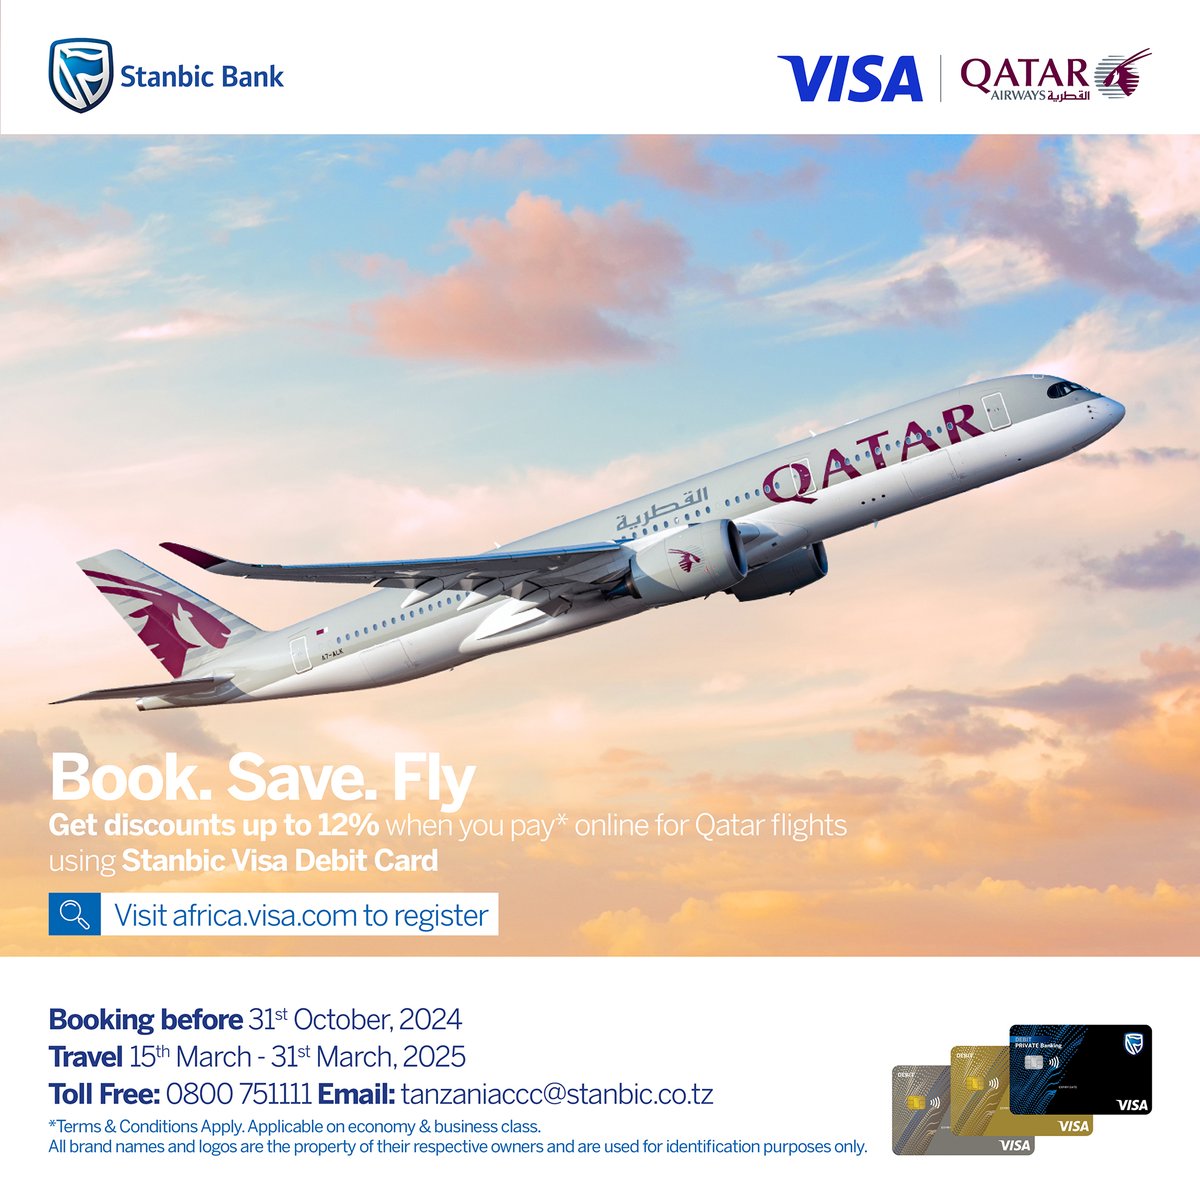 Discover new horizons with Qatar Airways and Visa. Save up to 12%* when you pay with your Stanbic Visa card. To enjoy this exclusive offer, visit africa.visa.com to register and receive the promo code to book your next trip. Terms and conditions apply. #PayWithVisa